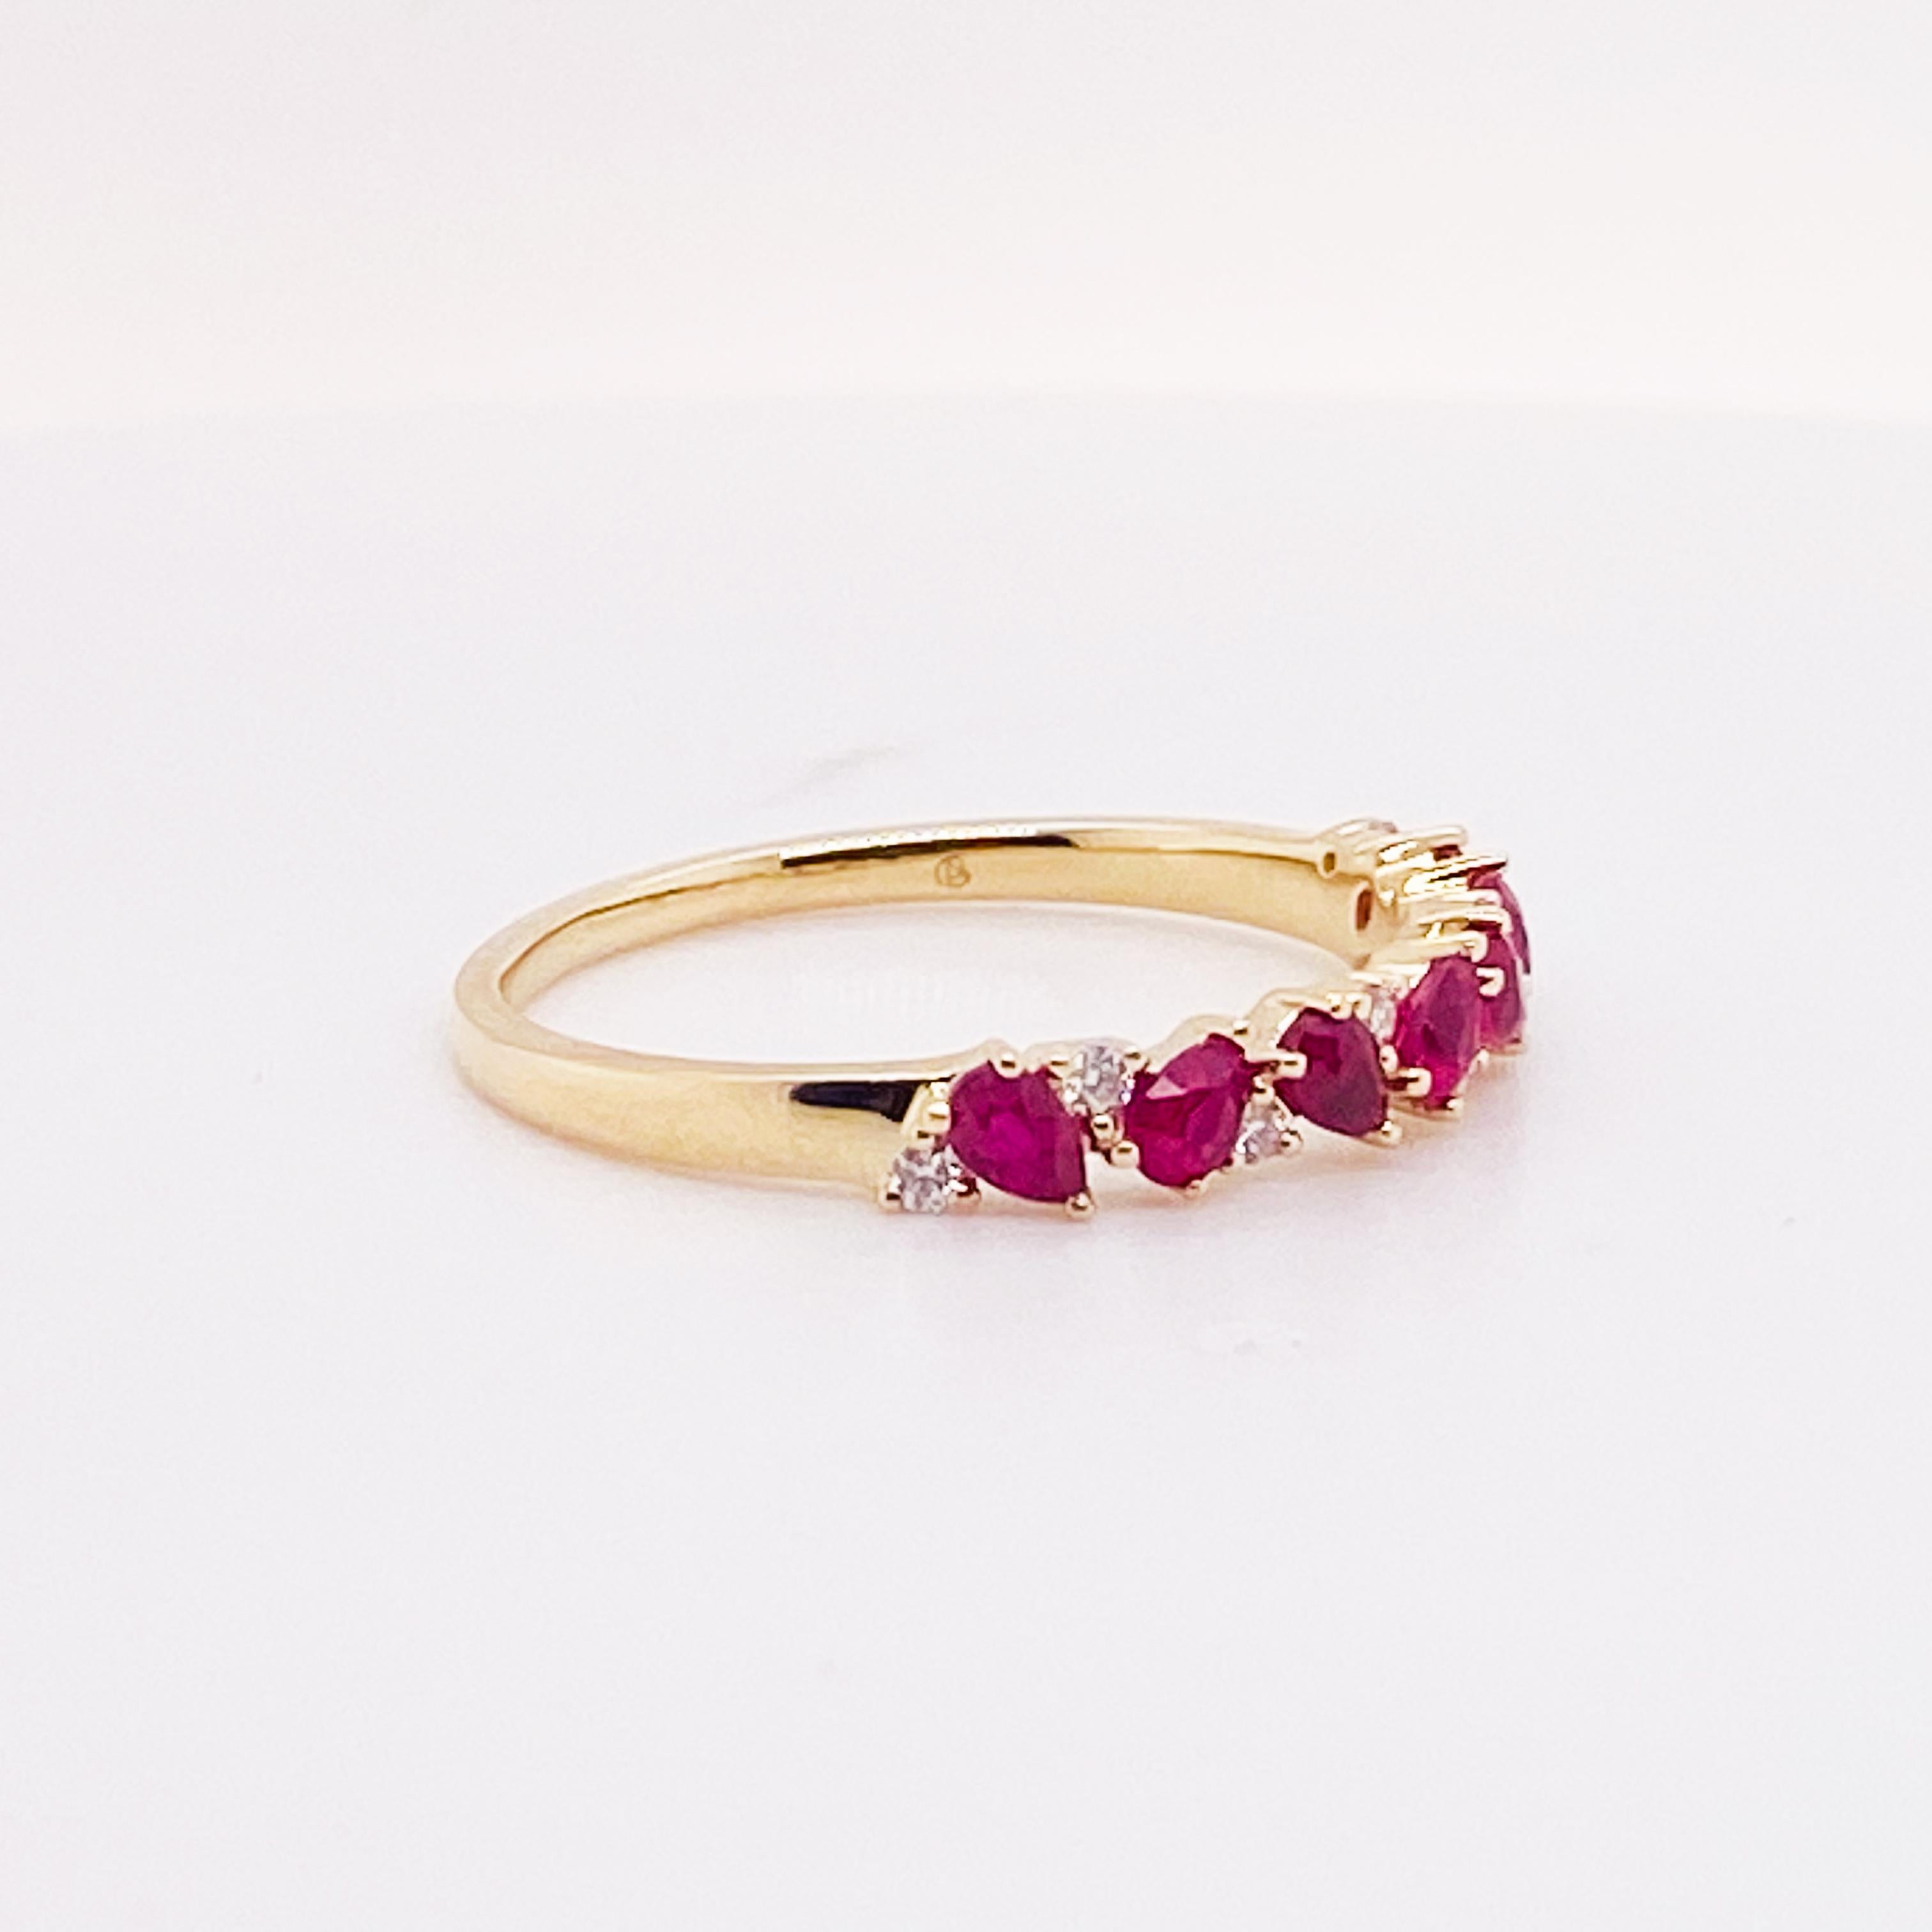 For Sale:  Ruby Diamond Band 14K Gold Pear Shape Ruby Interesting Stackable Band, Sizable 6